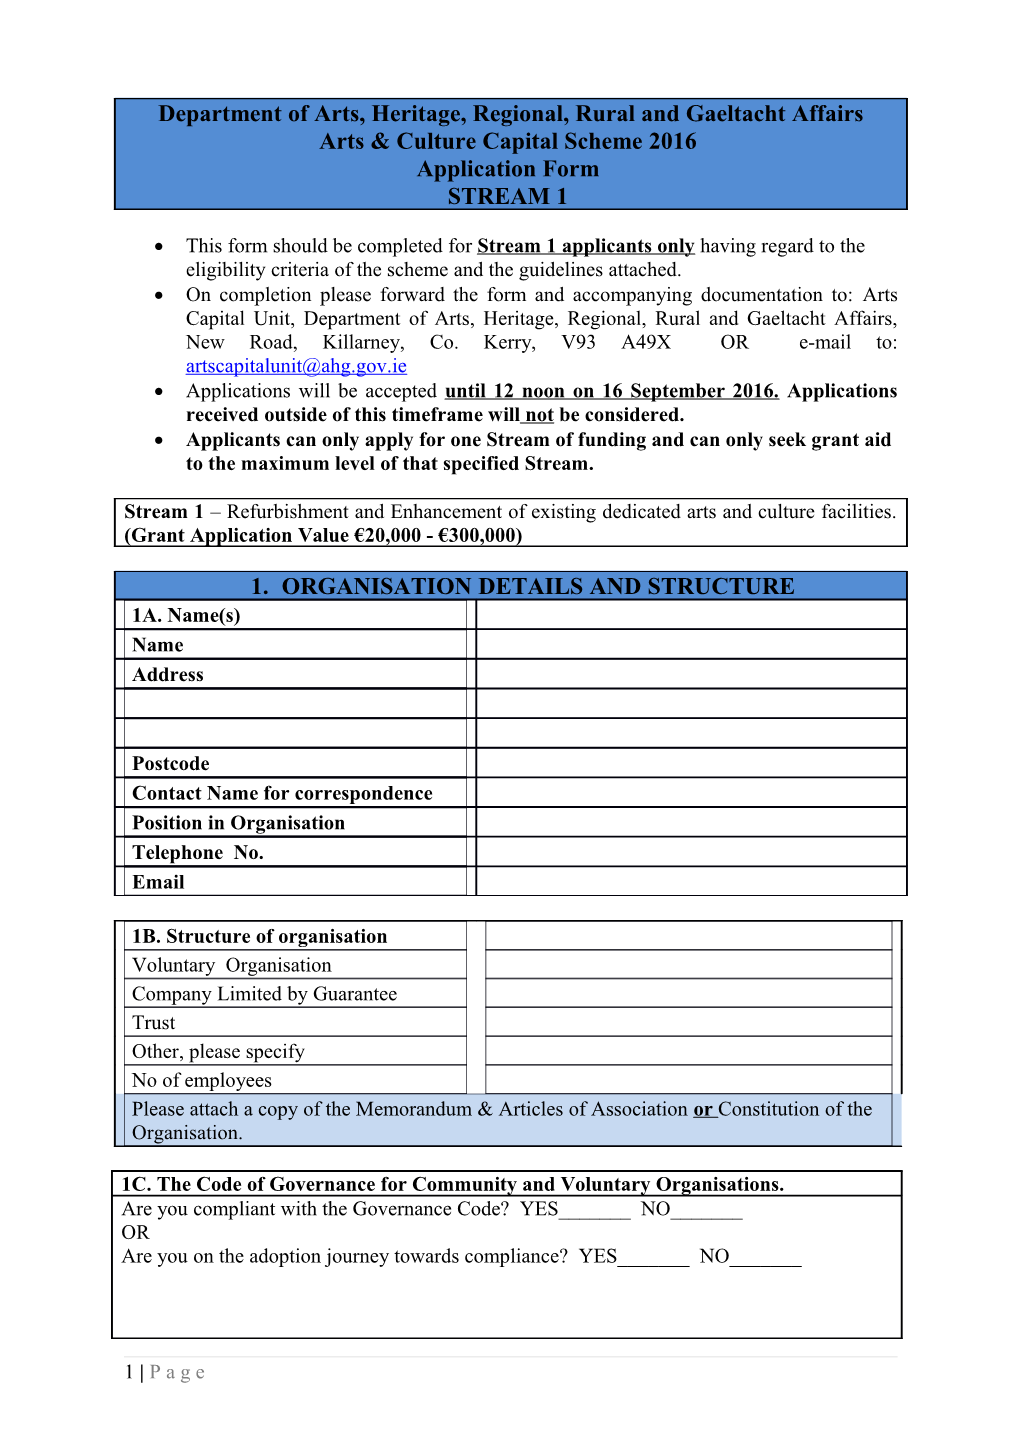 This Form Should Be Completed for Stream 1 Applicants Only Having Regard to the Eligibility